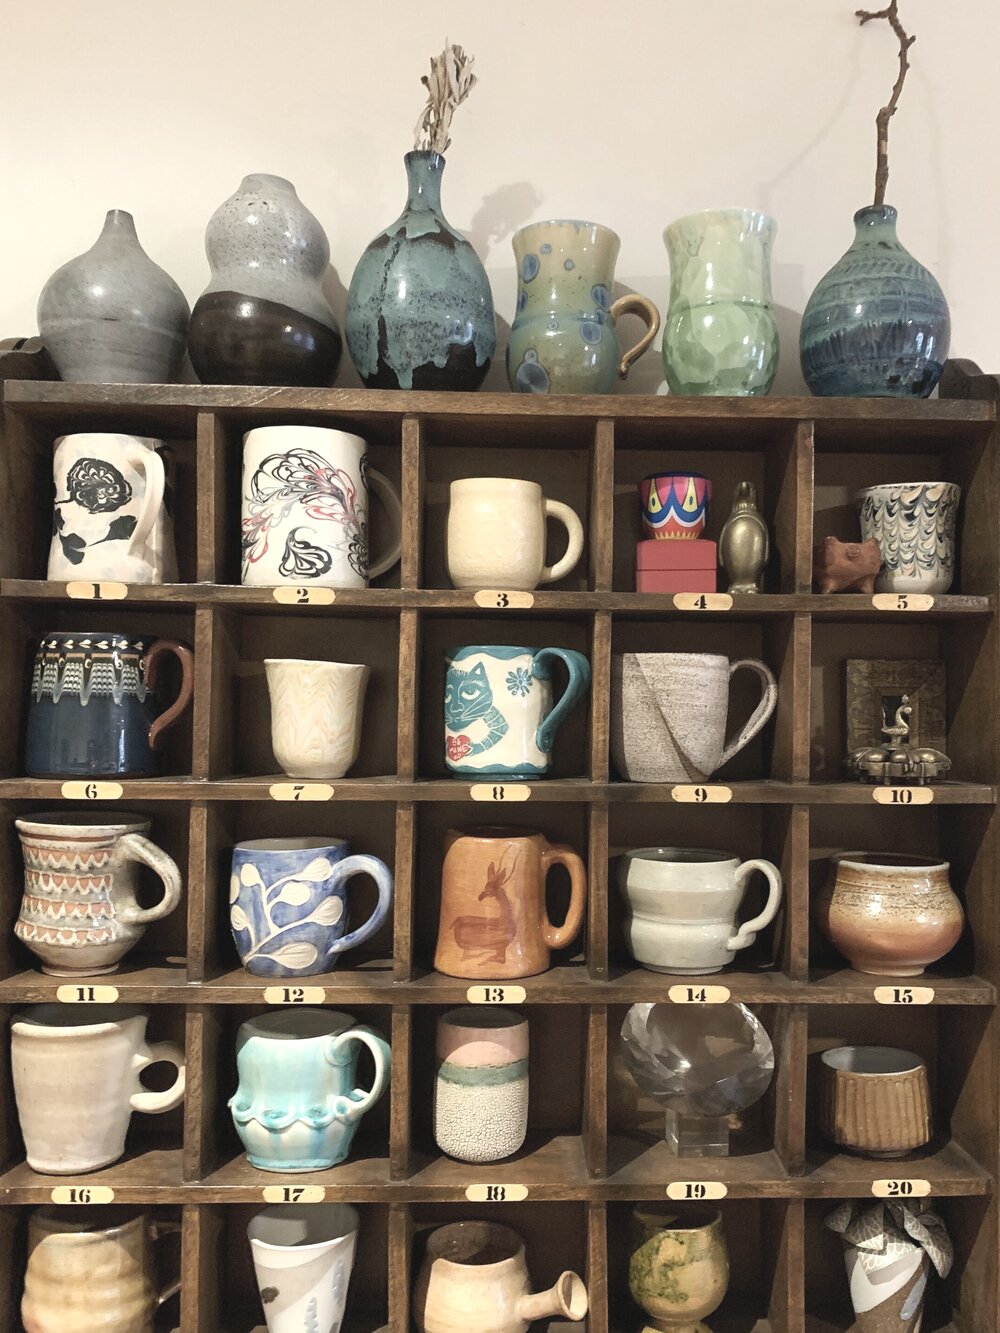  Morgan's mug collection including one of her earlier pieces 